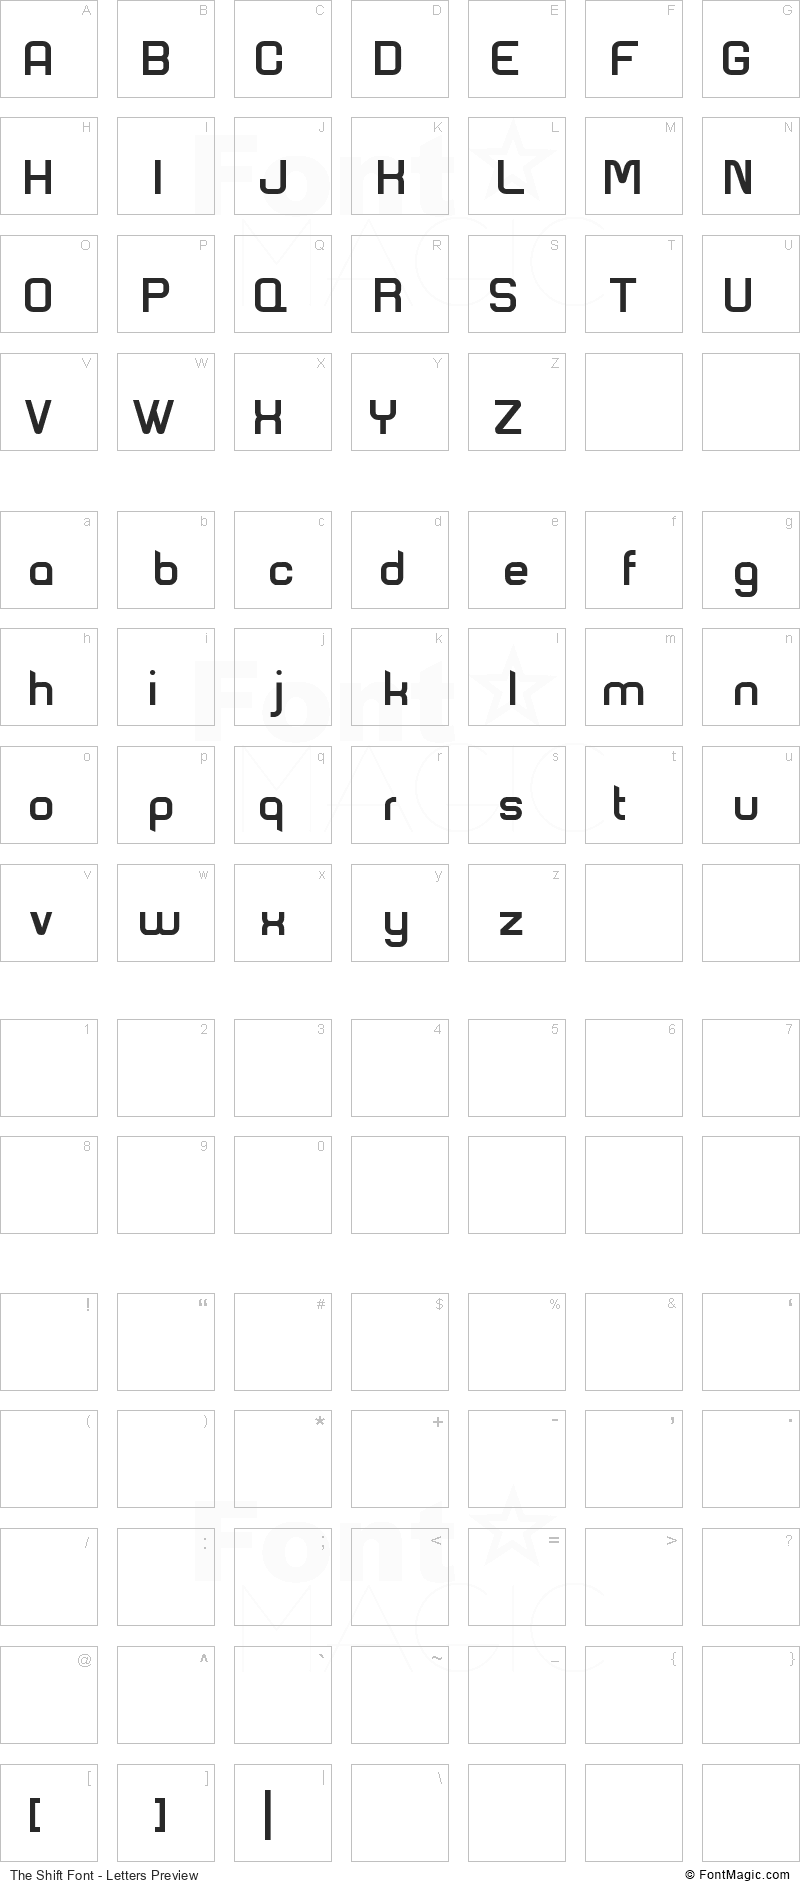 The Shift Font - All Latters Preview Chart